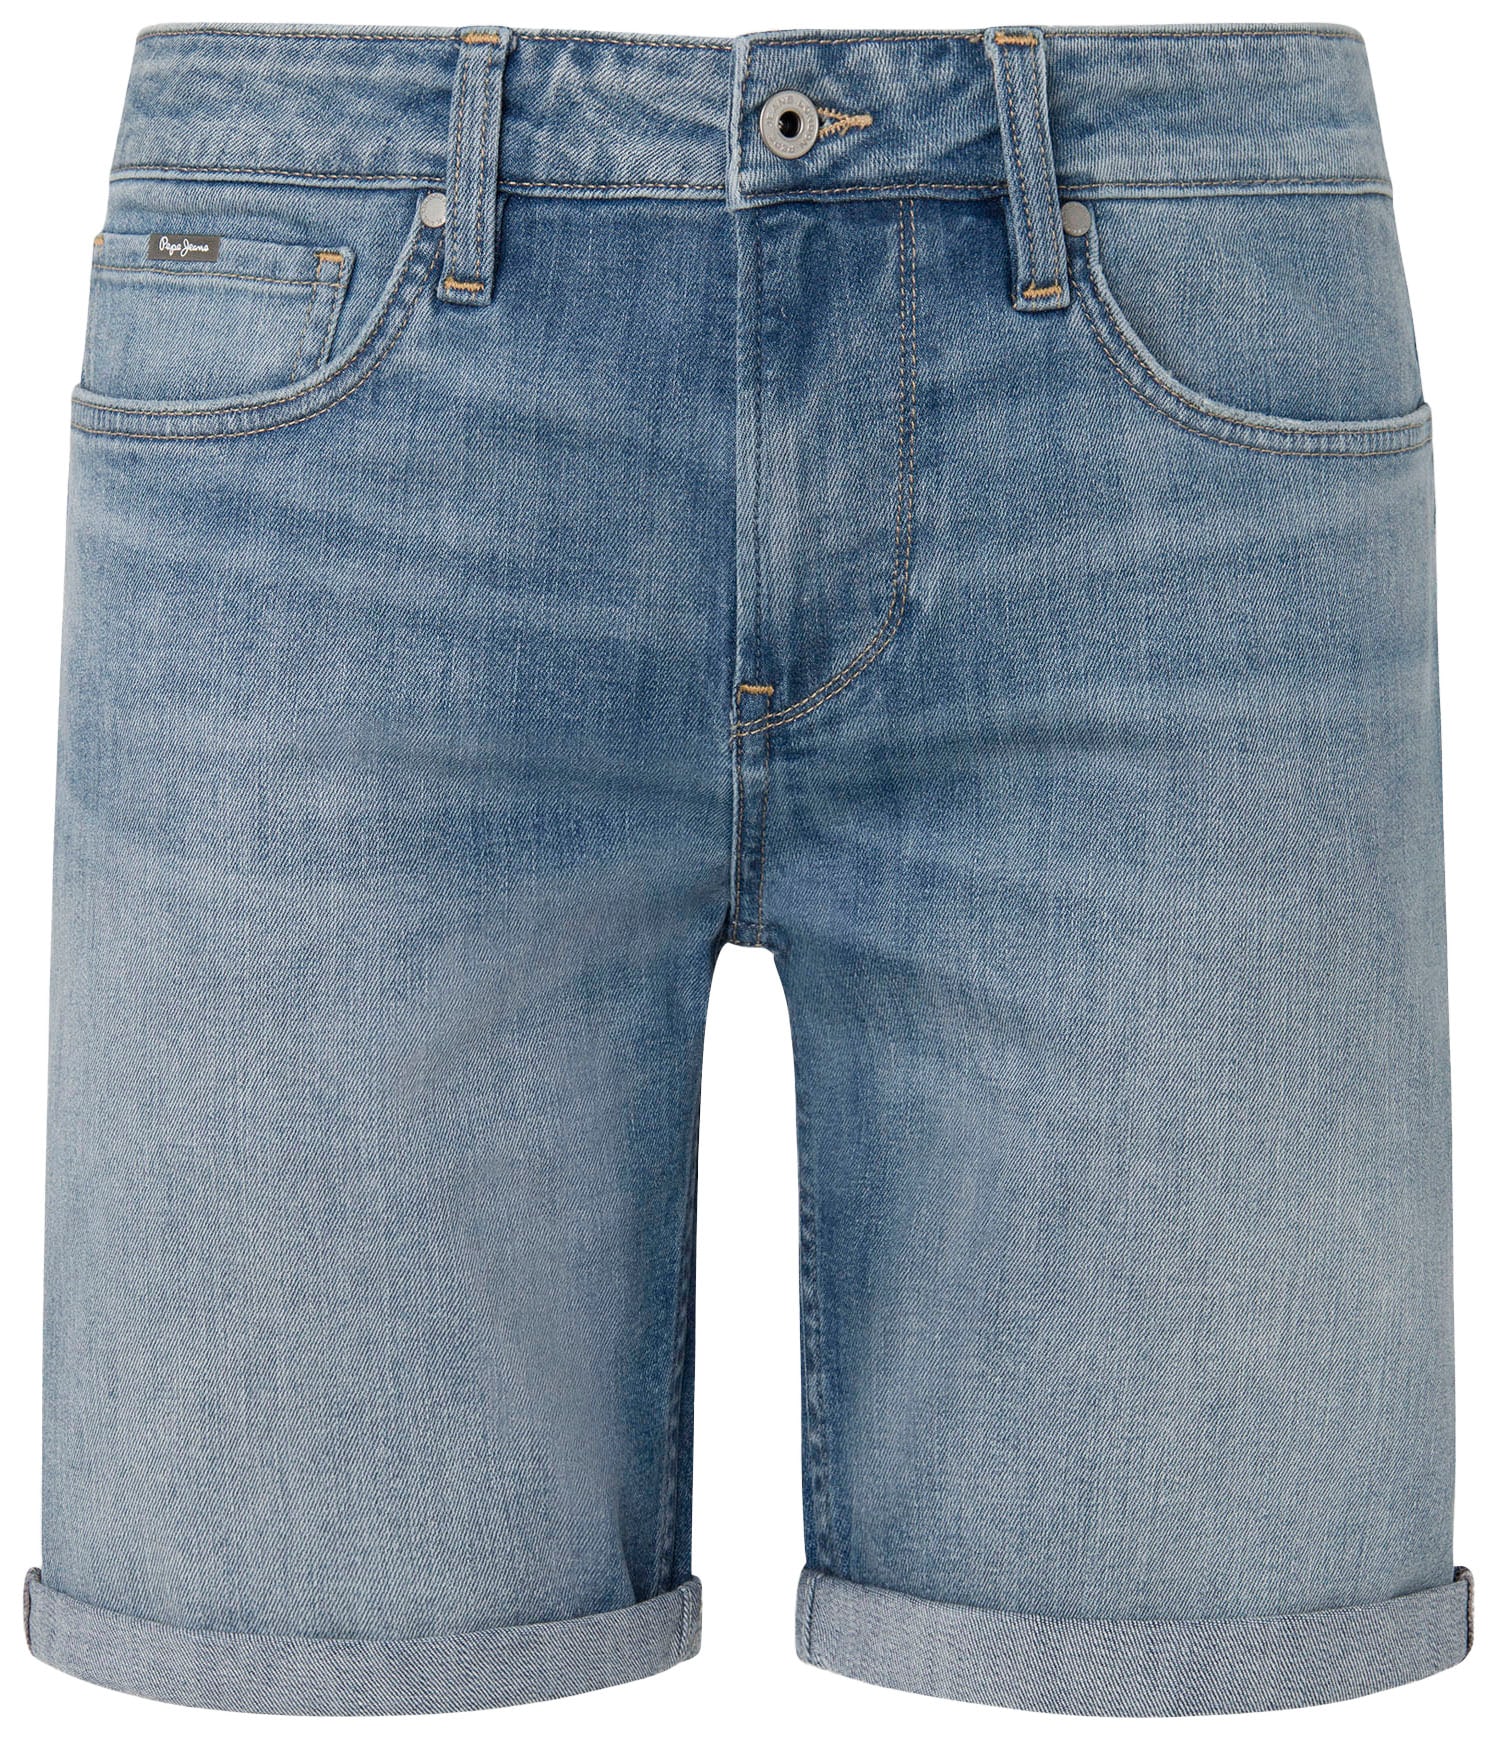 Pepe Jeans Shorts von Pepe Jeans